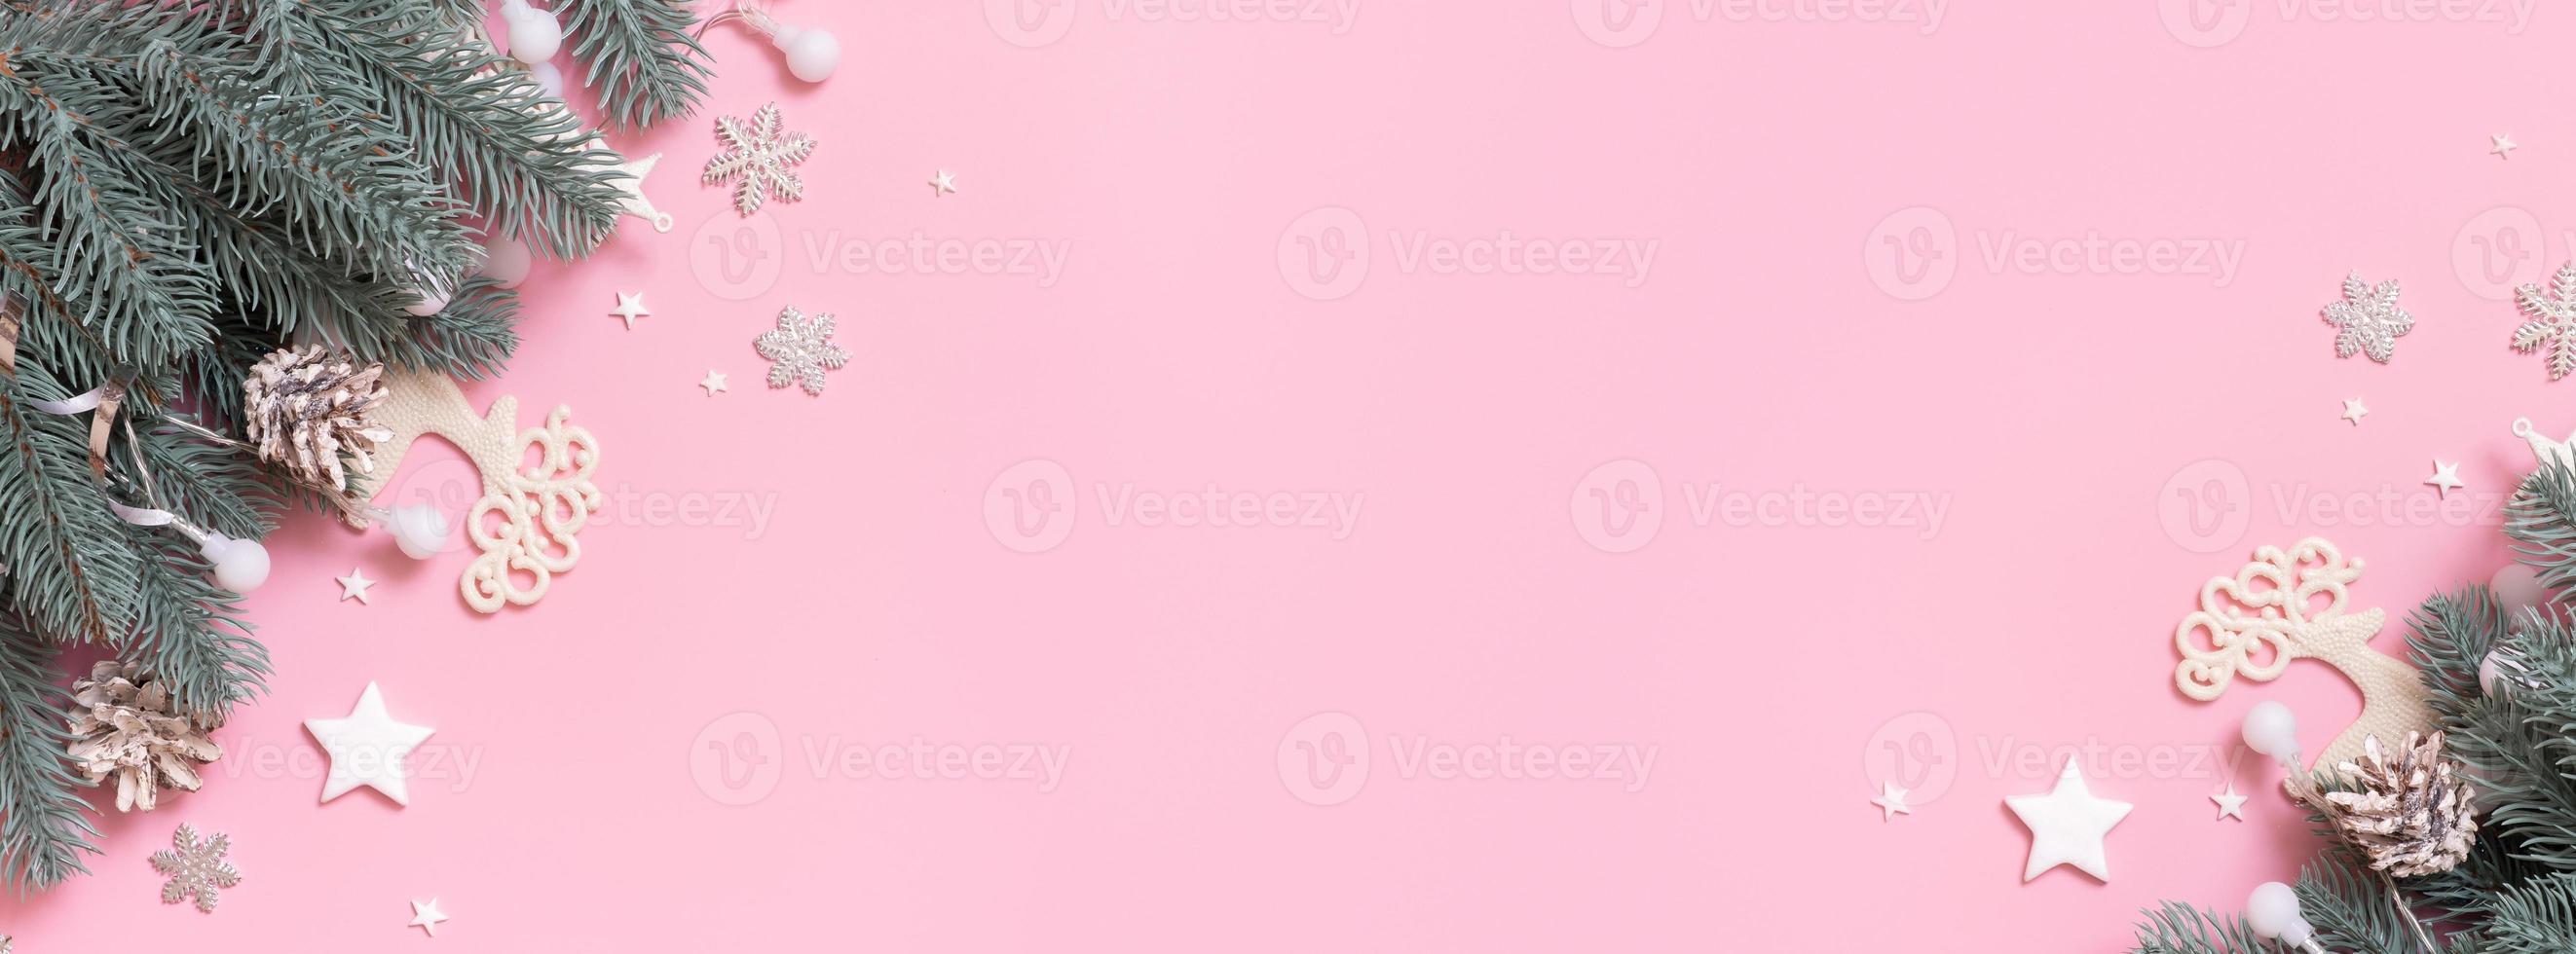 Cristmas New Year decoration top view, flat lay on pink background with copy space. Xmas blank greeting card photo